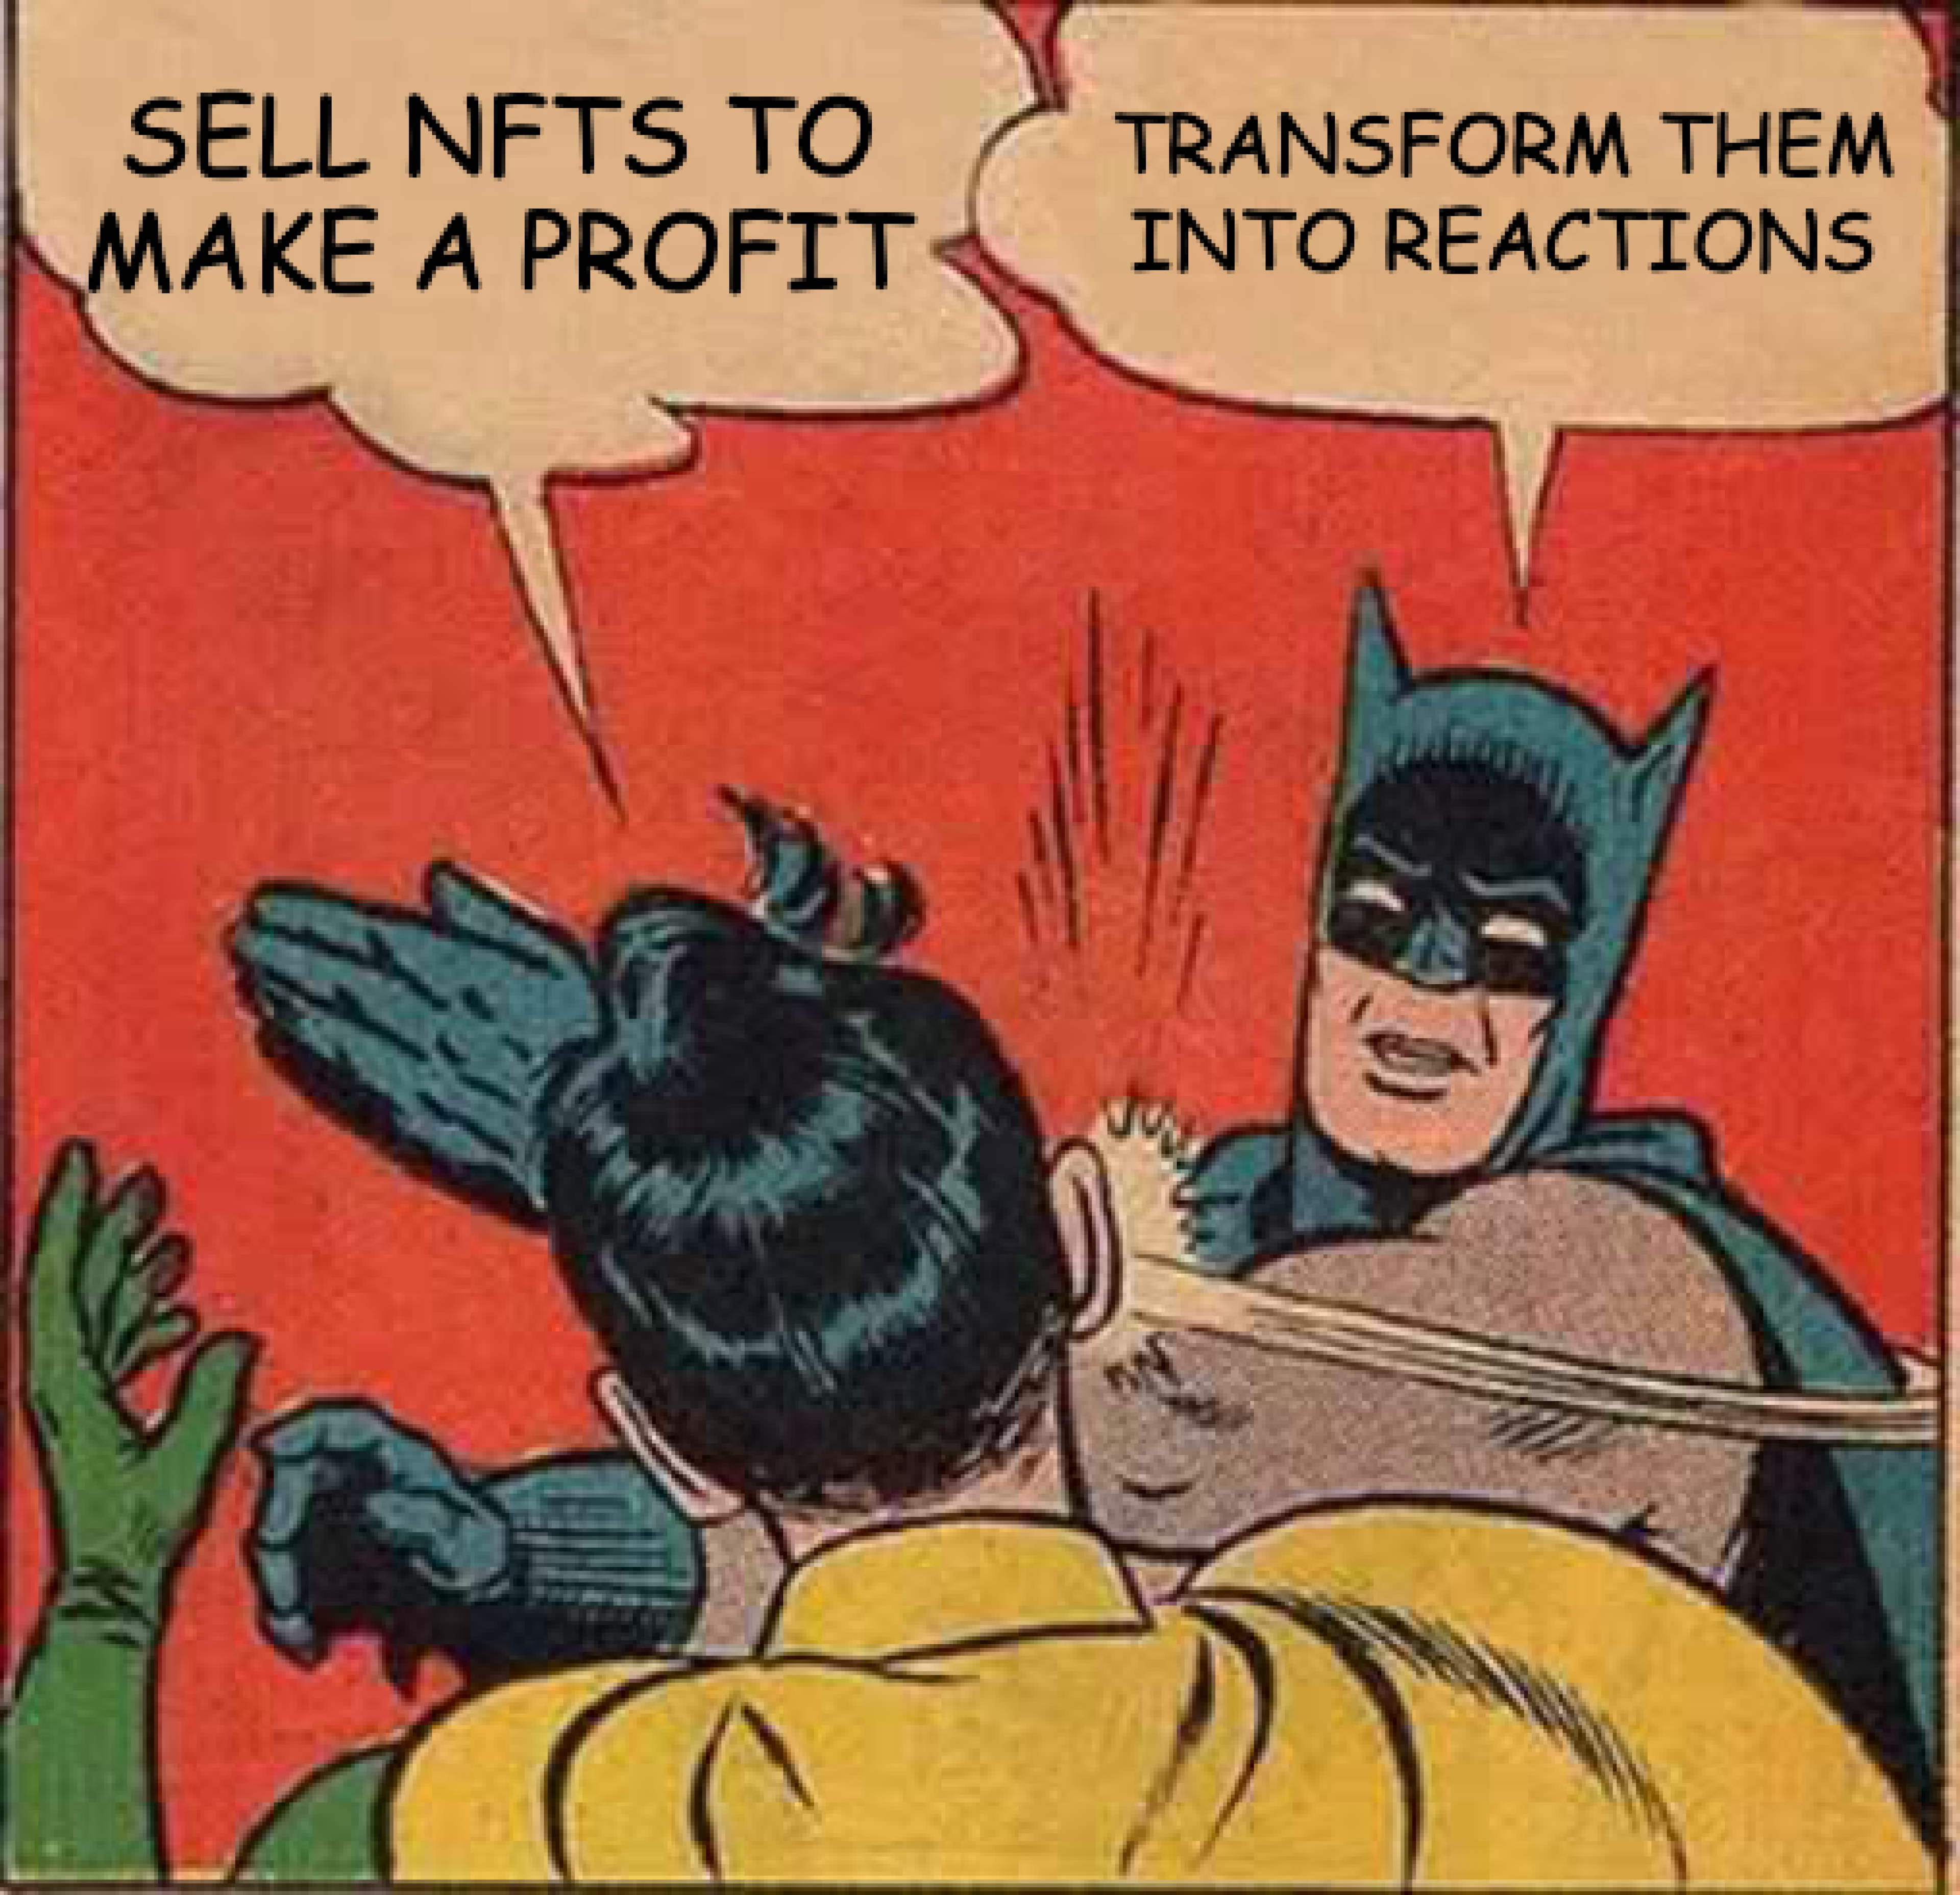 Batman knows the value of an NFT depends on proliferating the meme of the NFT.